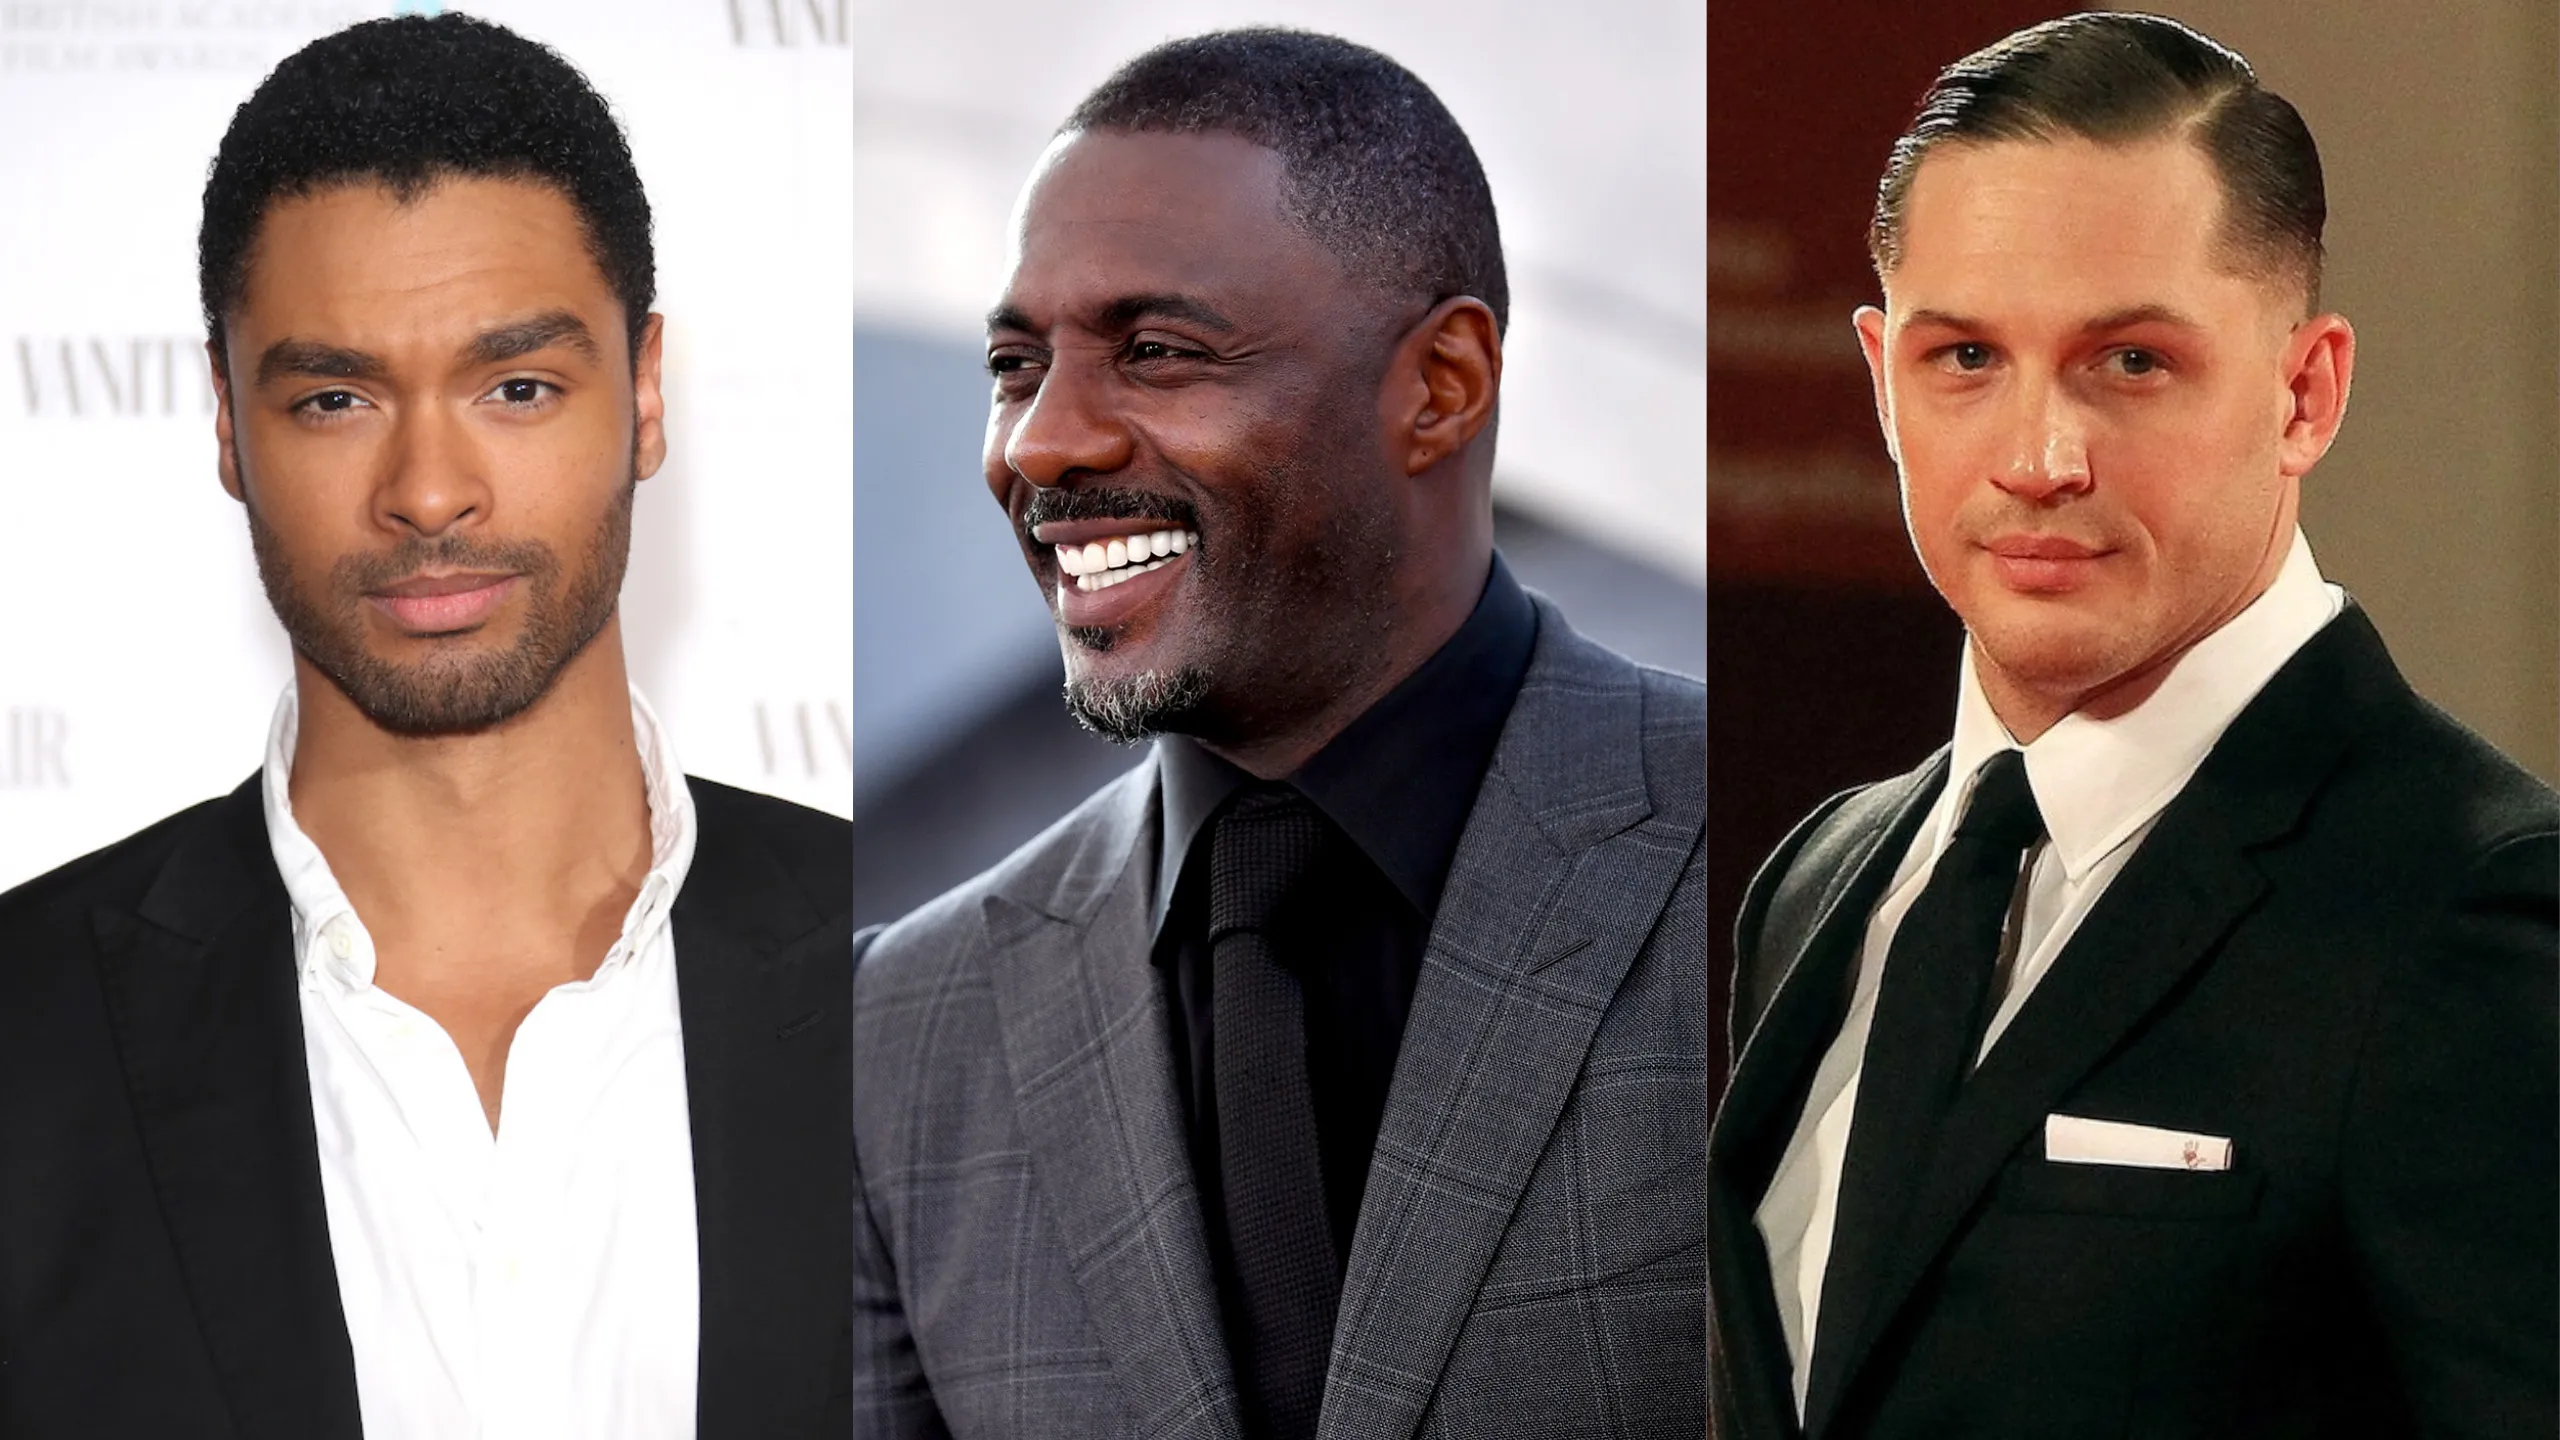 Who Will Be the Next James Bond?